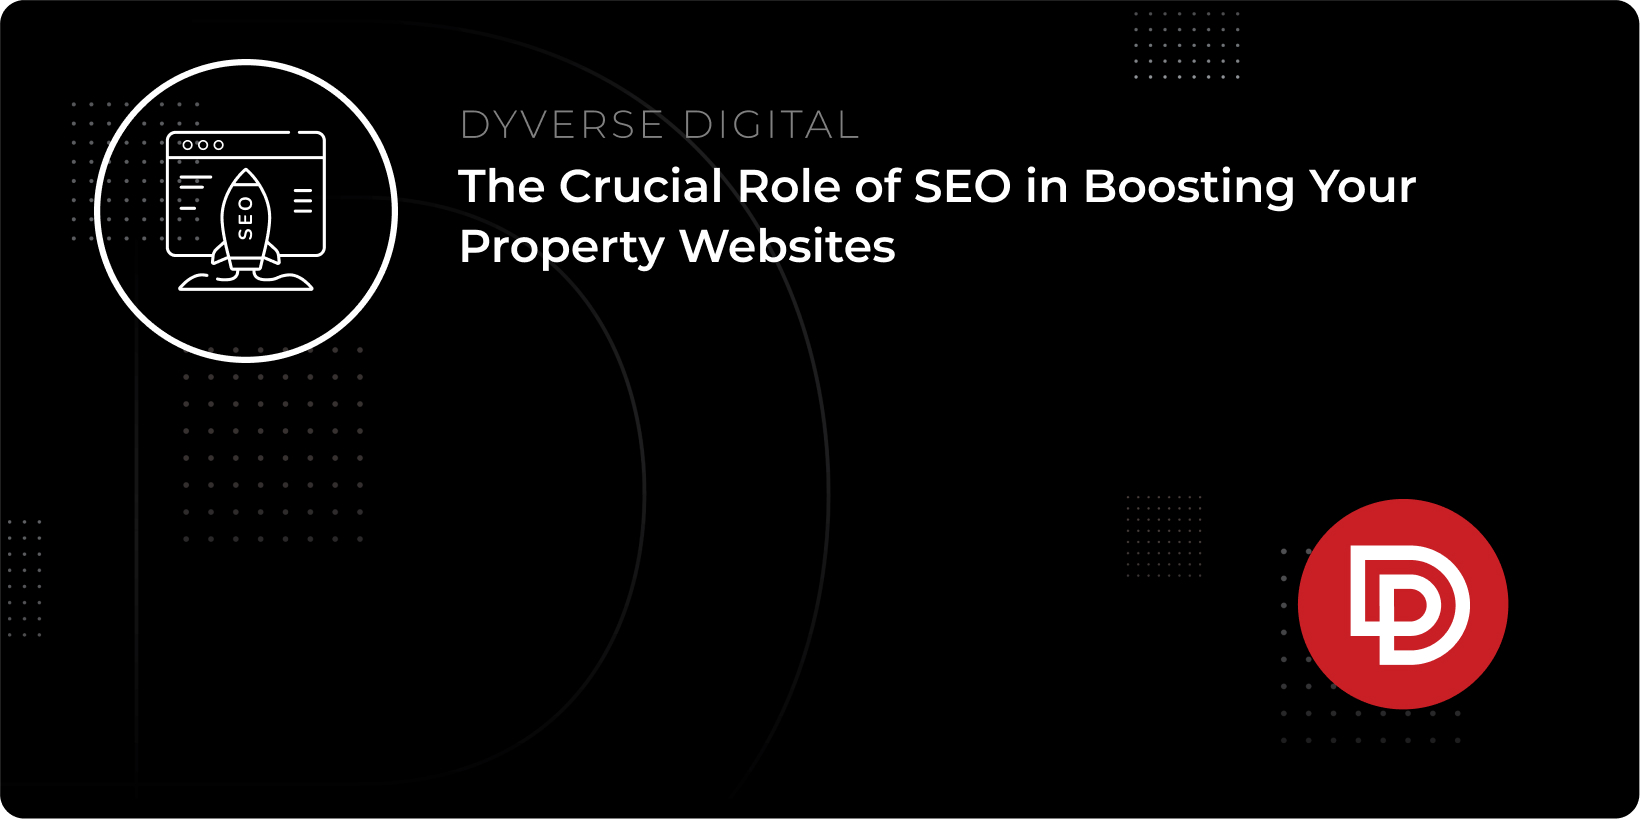 The Crucial Role of SEO in Boosting Your Property Websites